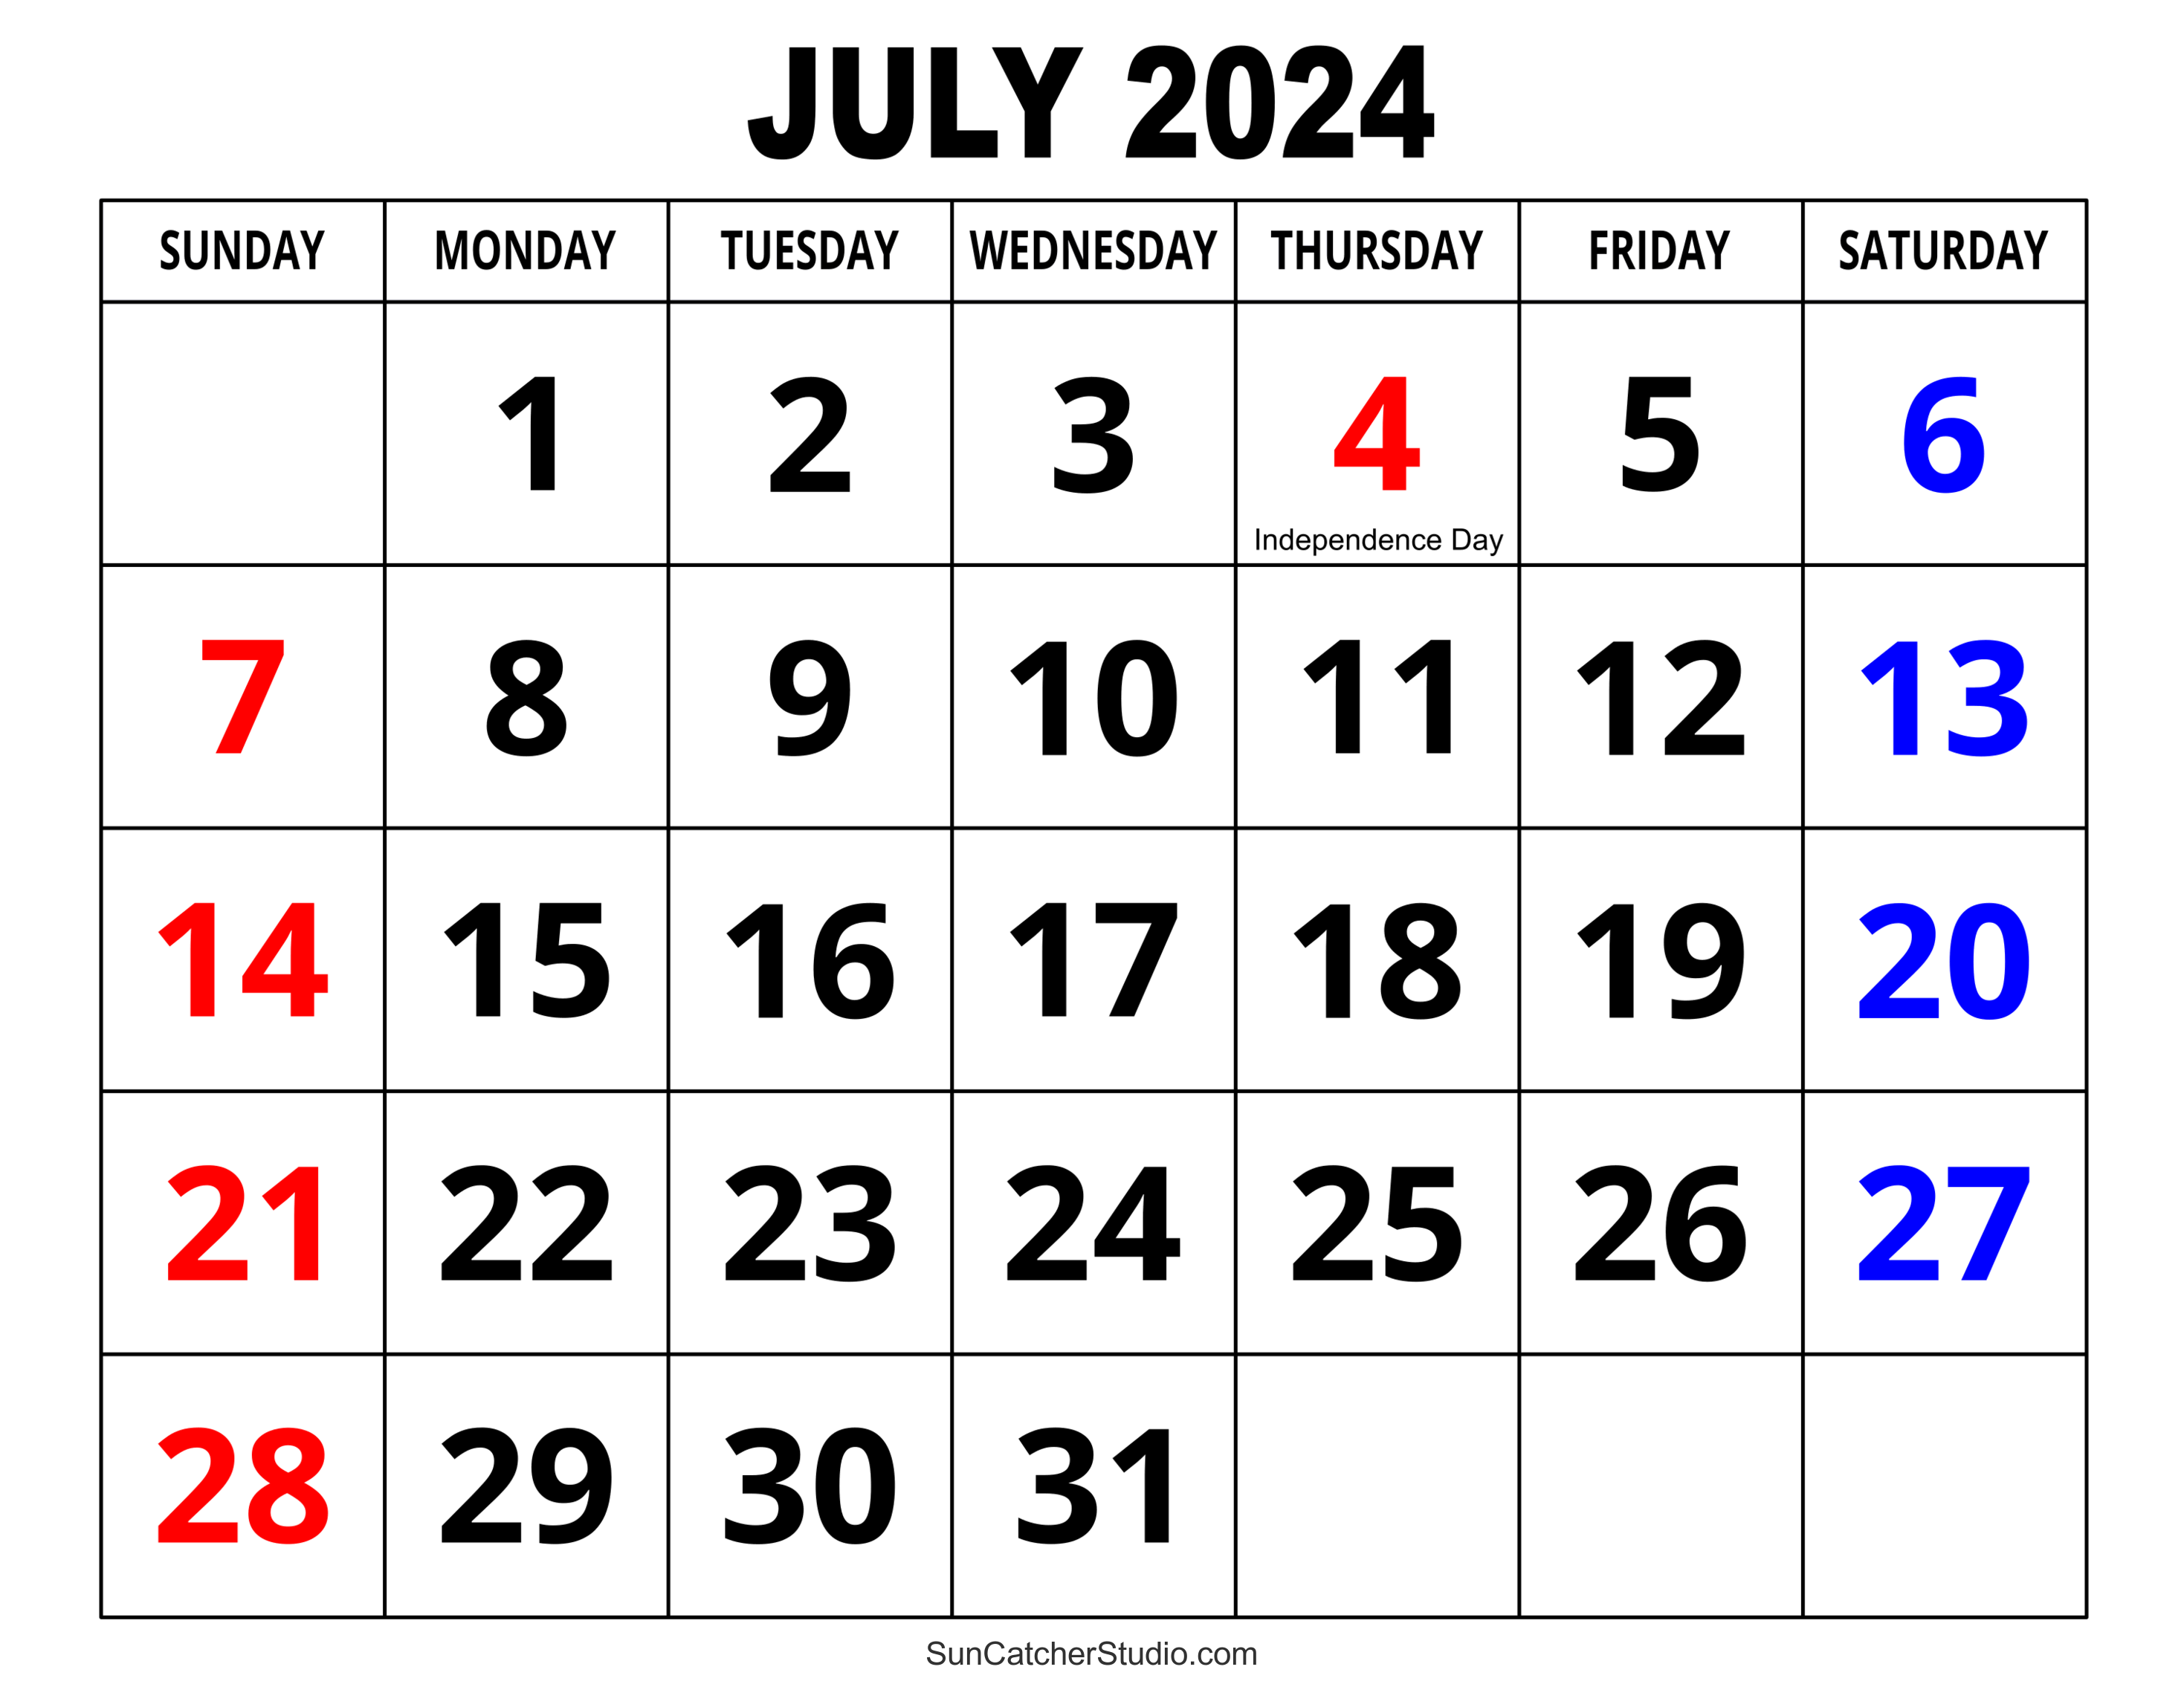 July 2024 Calendar (Free Printable) – Diy Projects, Patterns pertaining to 23 July 2024 Calendar Printable